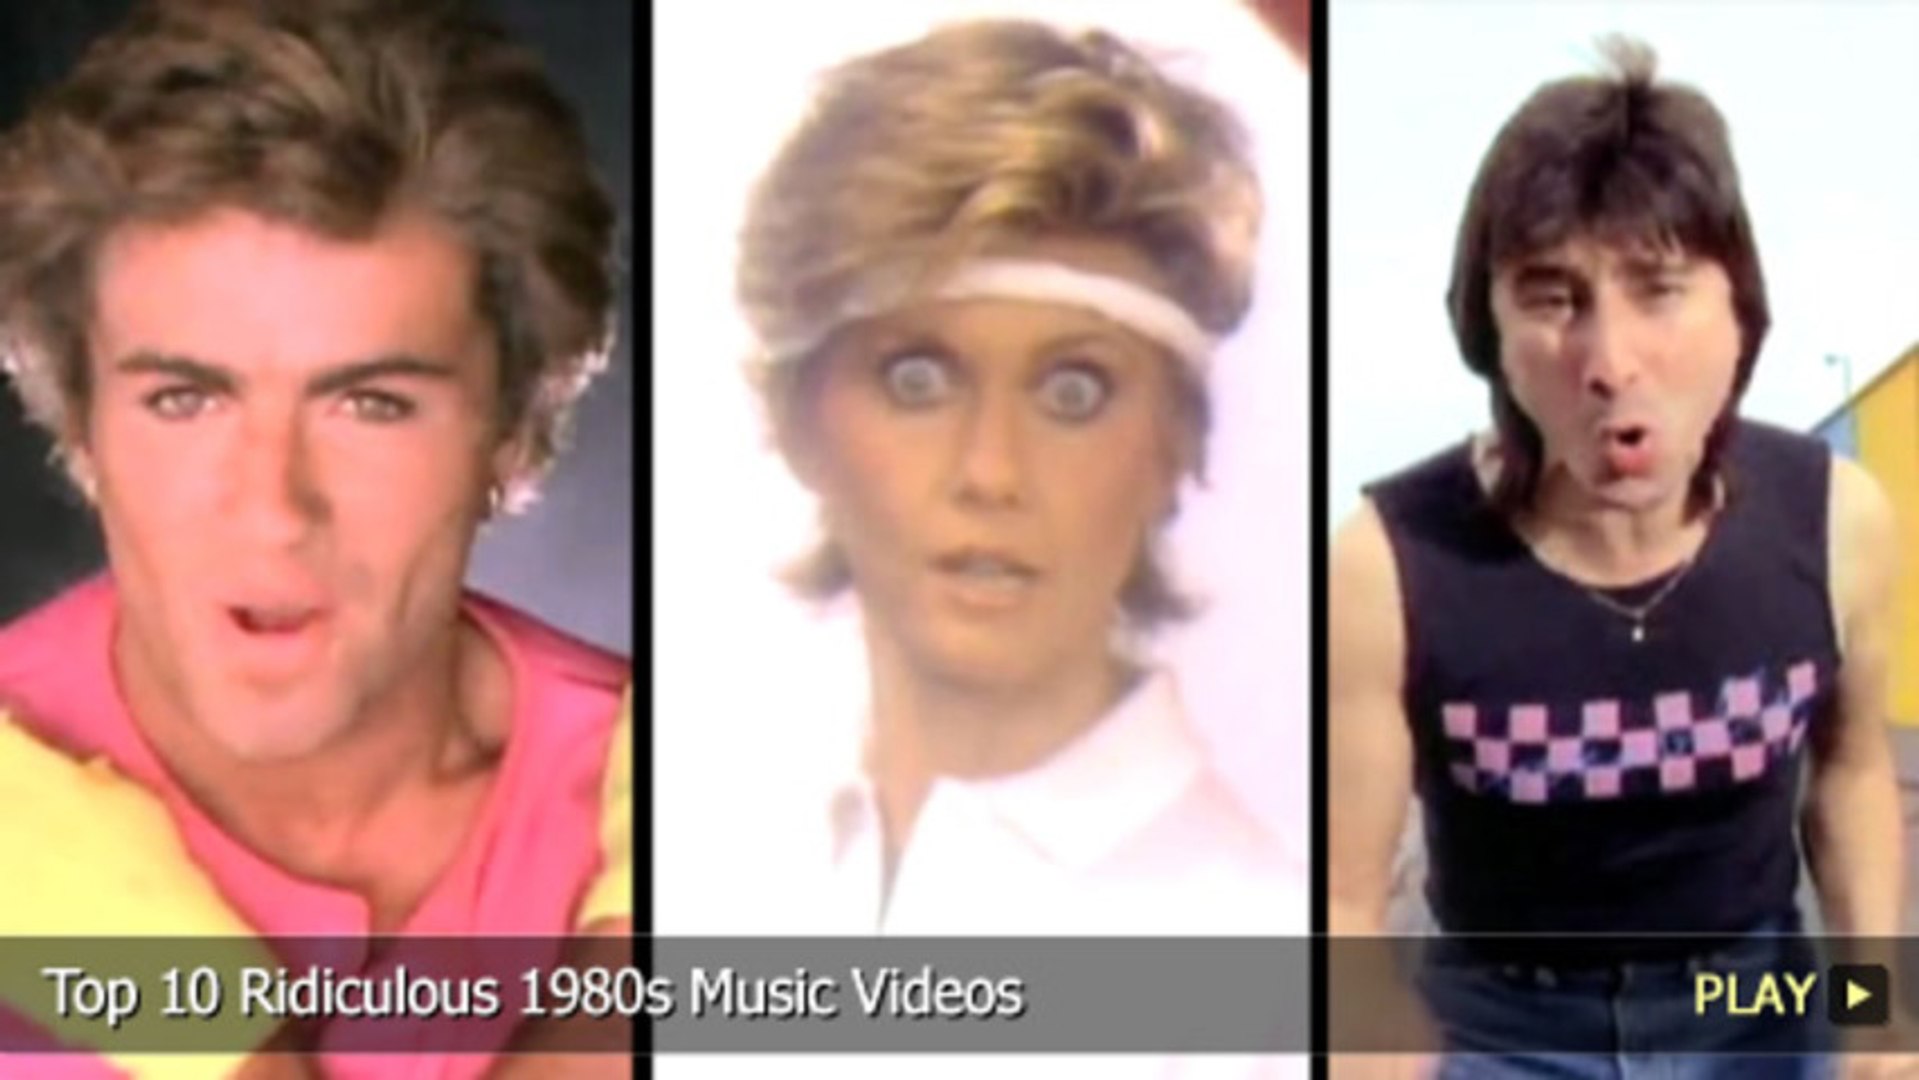 Top 10 Ridiculous 1980s Music Videos